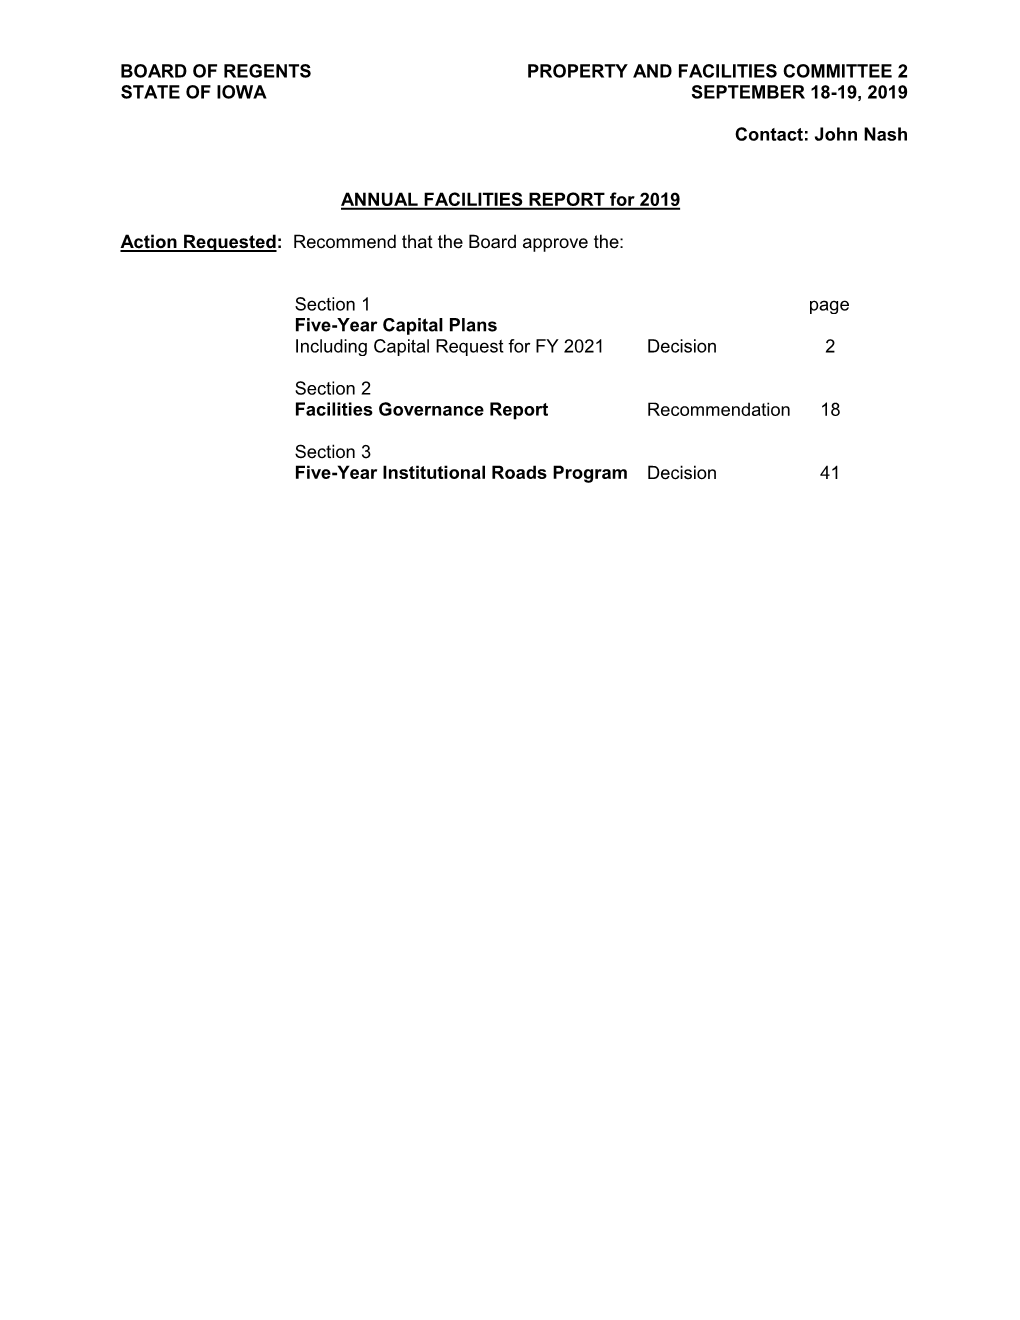 ANNUAL FACILITIES REPORT for 2019